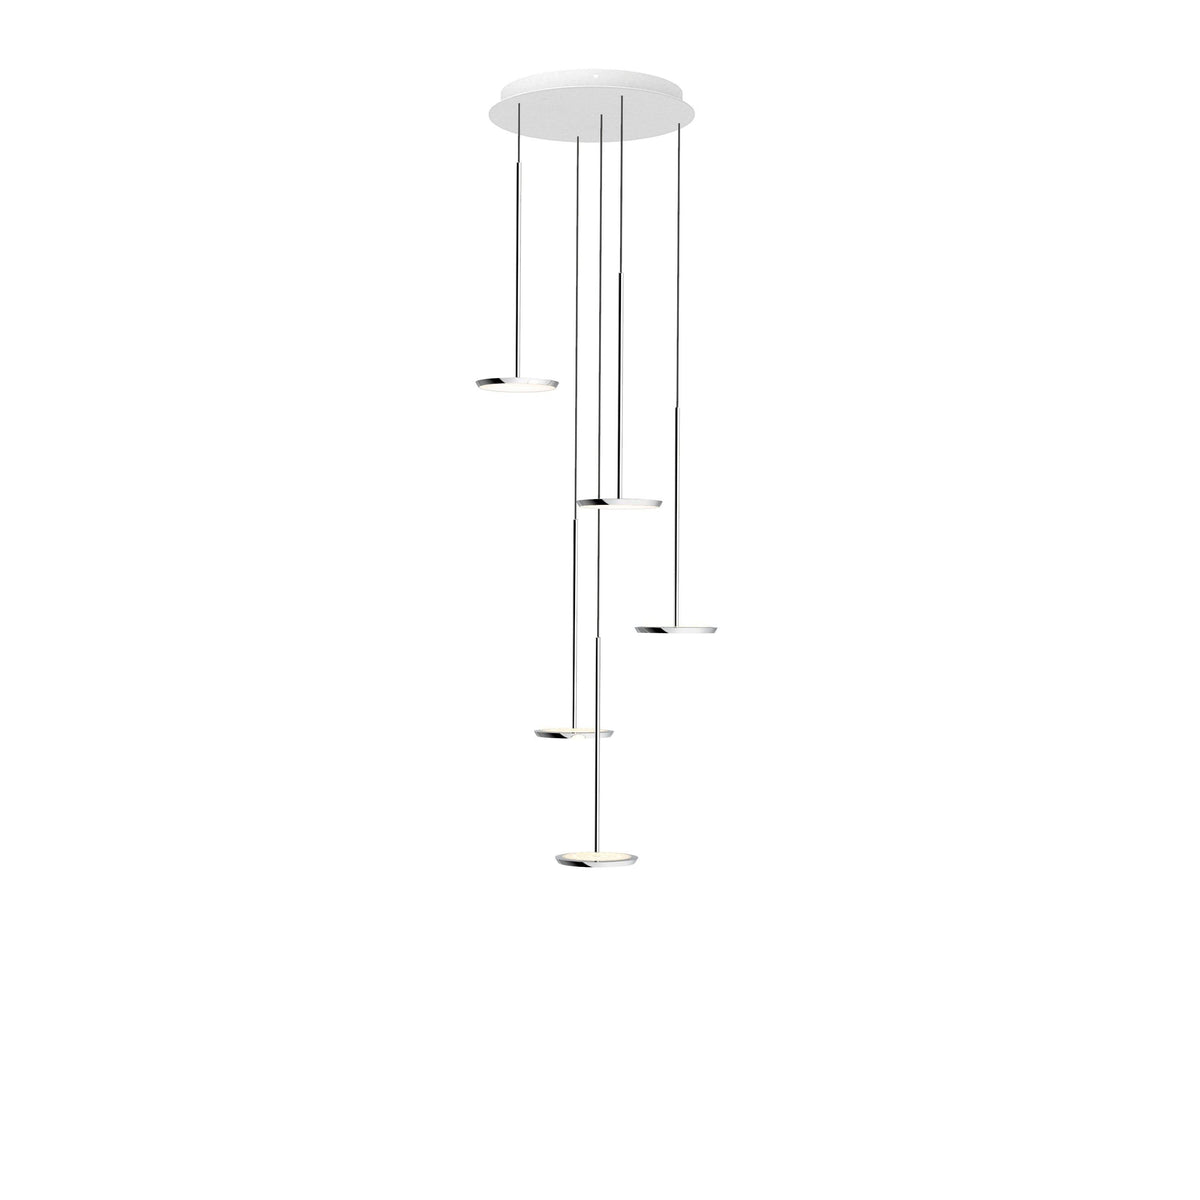 Pablo Designs - Sky Solo Chandelier - SKY 5 CHAND | Montreal Lighting & Hardware